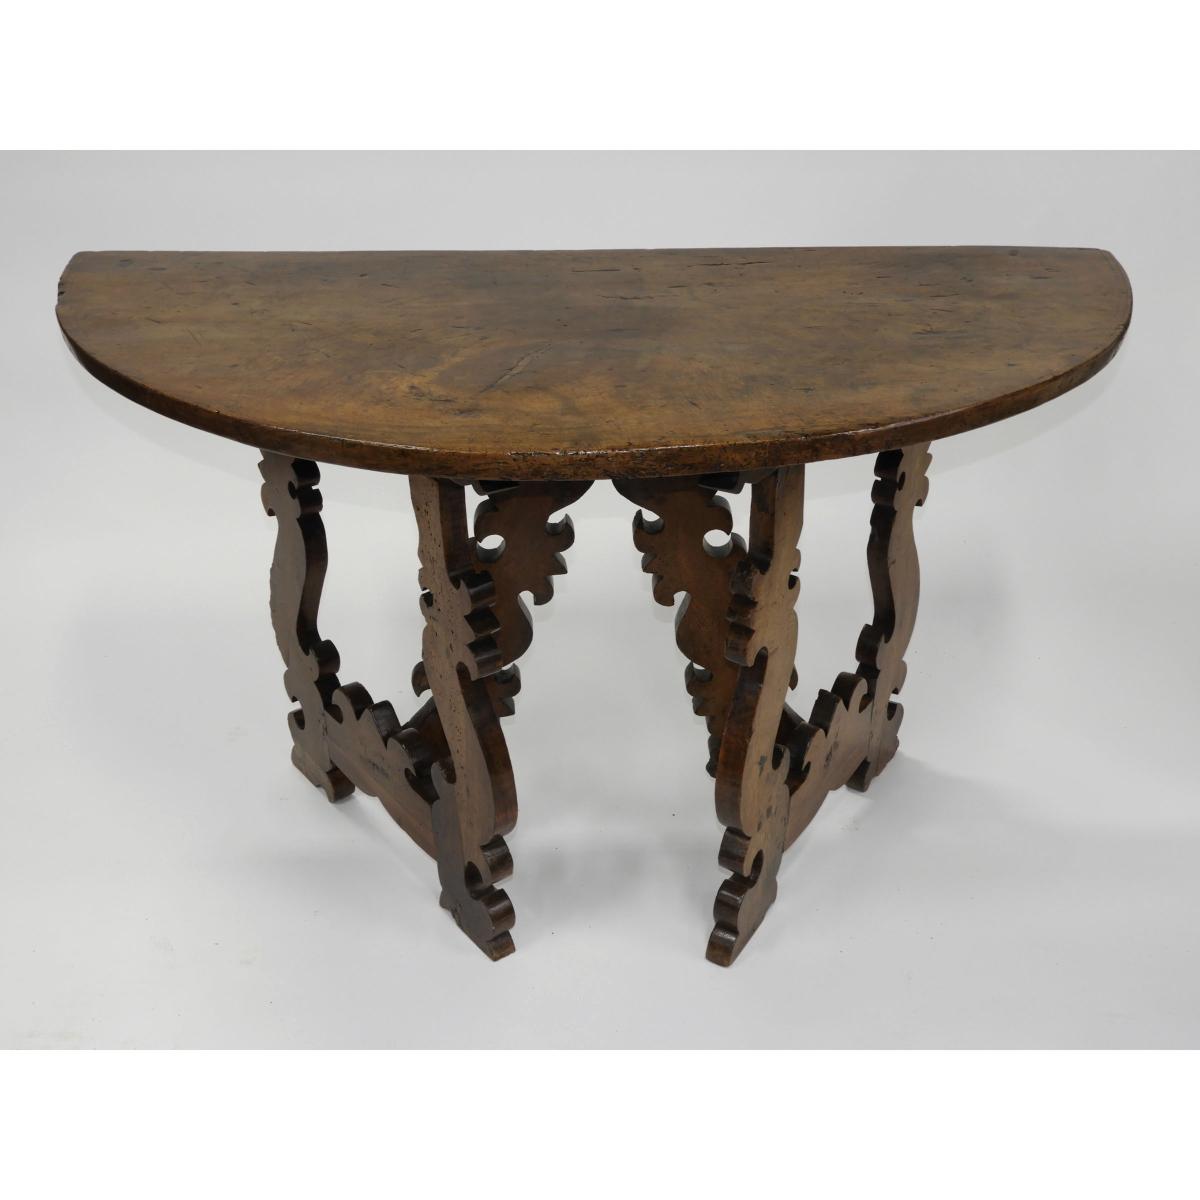 Spanish Baroque Walnut Demilune Console Table, late 17th century, 29.5 x 52 x 25.25 in — 74.9 x 132. - Image 2 of 2